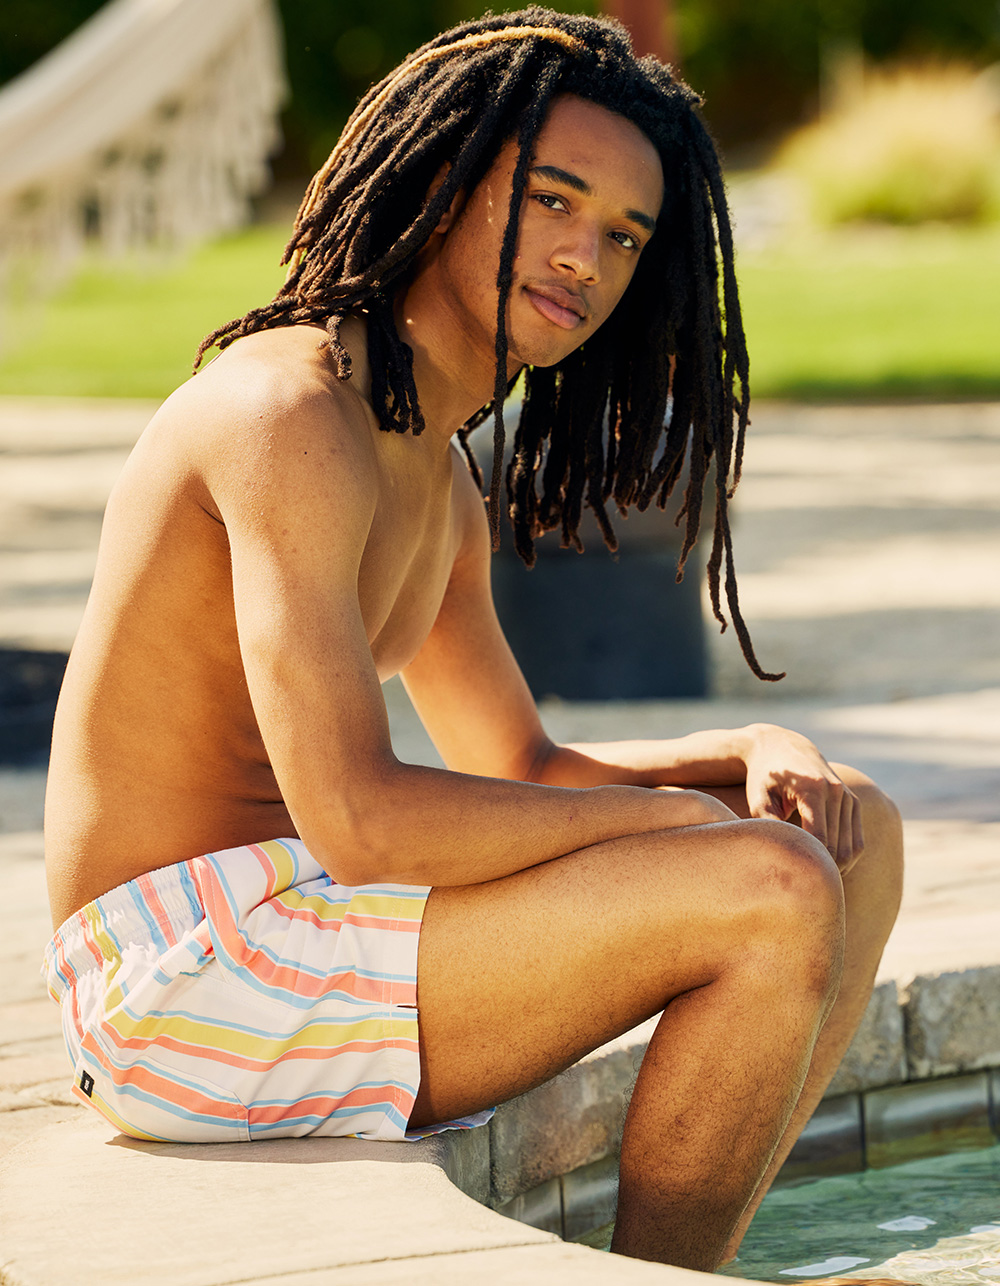 Board Shorts For Men: Hit the Beach In Style With Surfing Shorts For Men